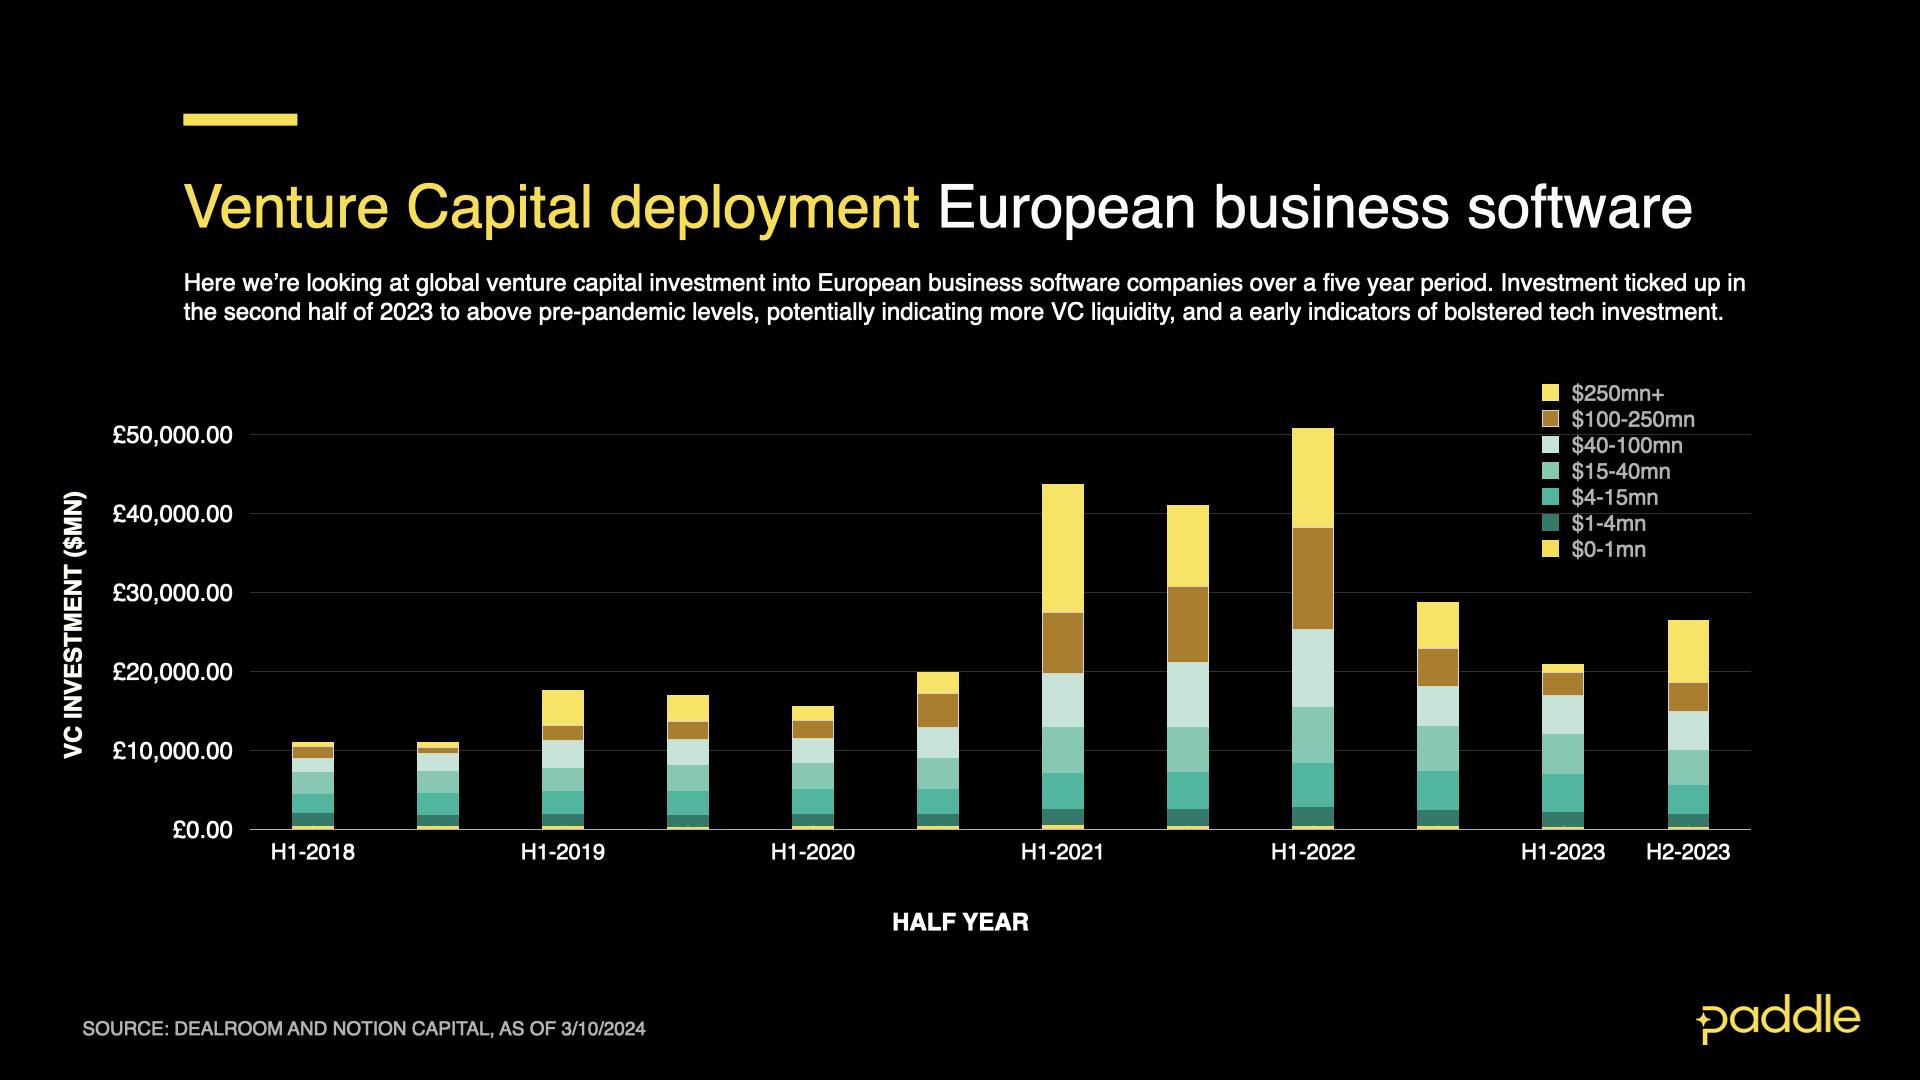 Venture capital investments into European software companies over 5 years.